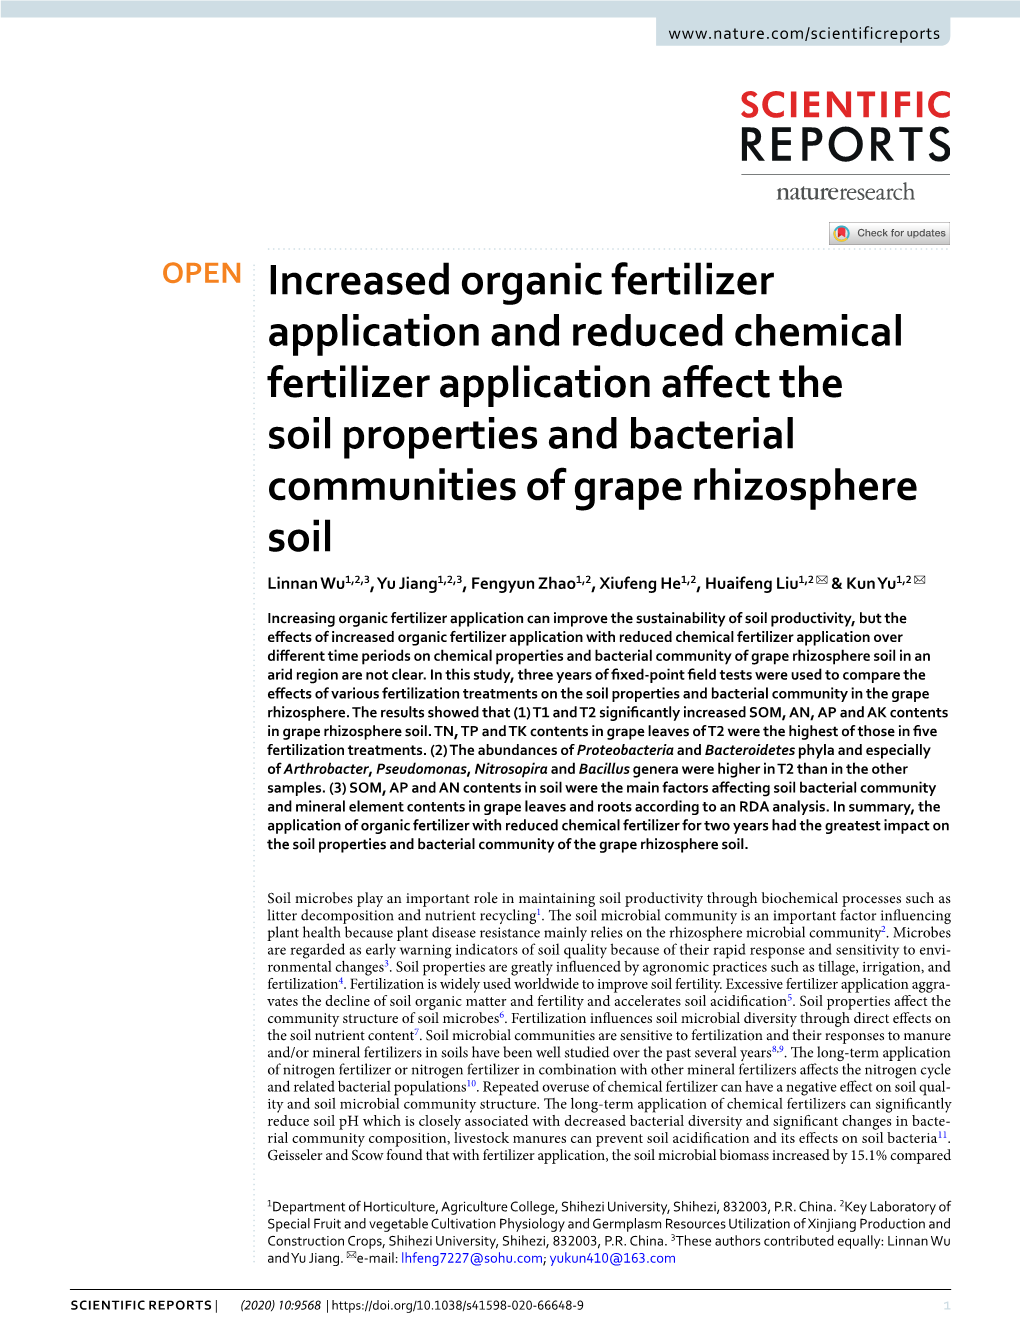 Increased Organic Fertilizer Application and Reduced Chemical